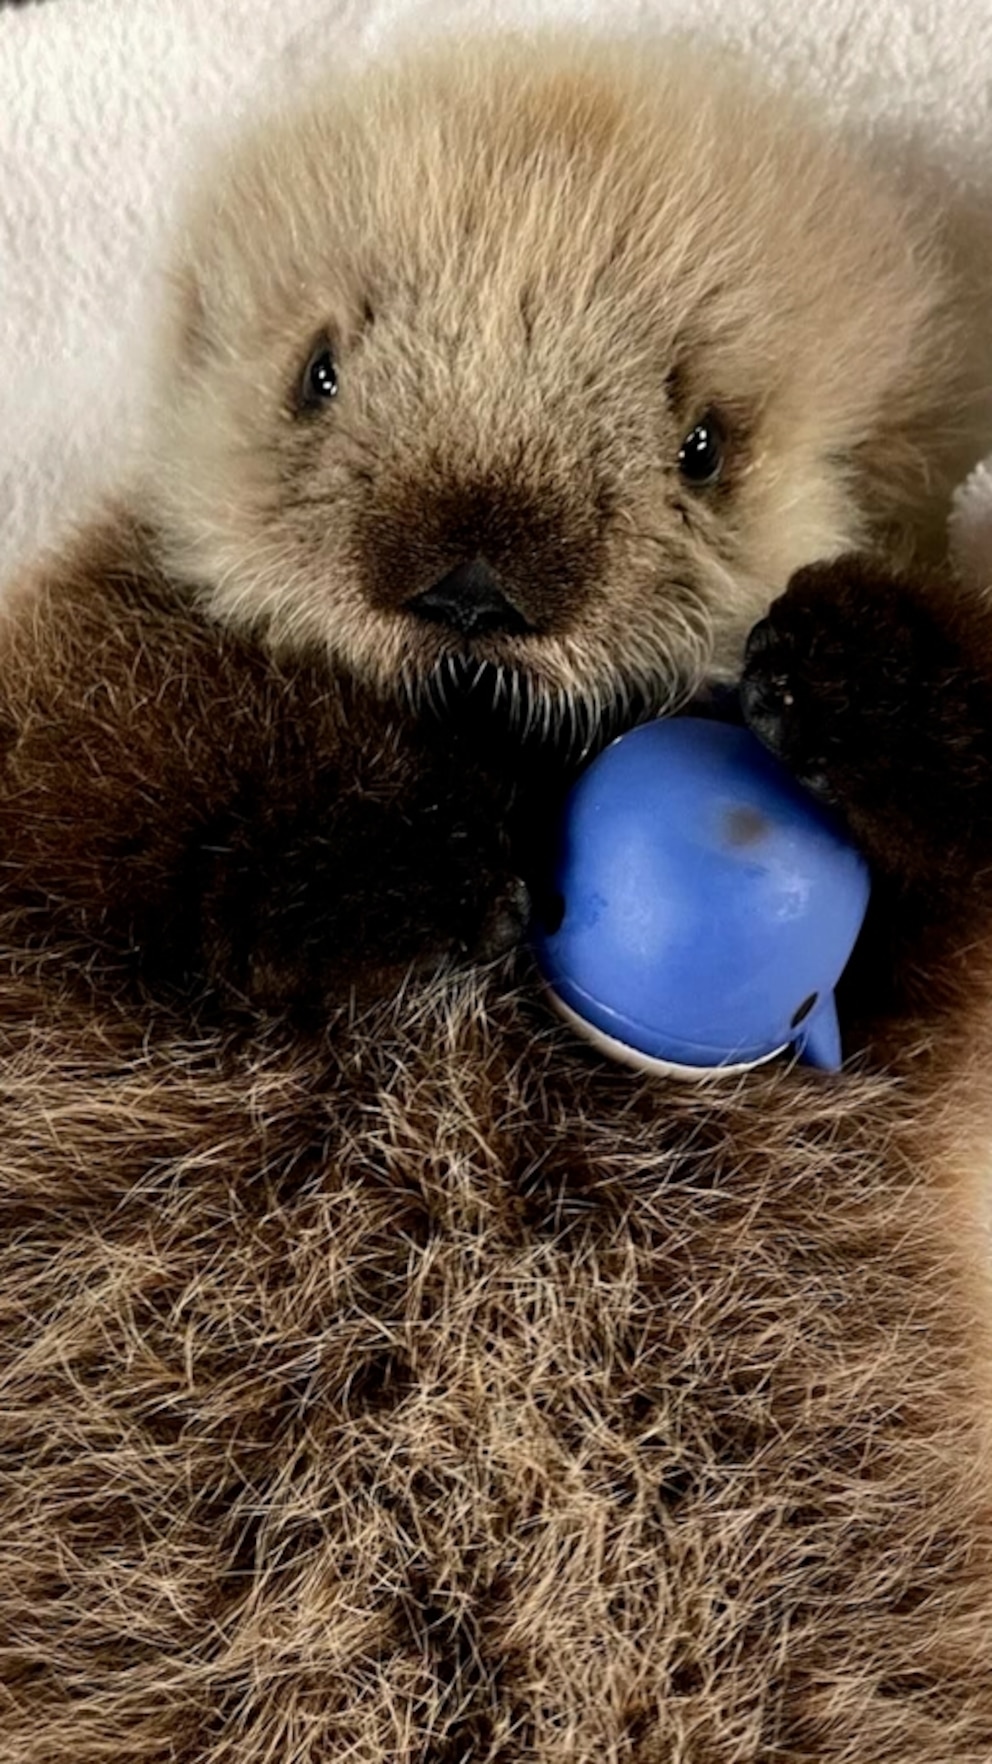 Rescuers Nurse 5-Week-Old Orphaned Baby Sea Otter Pup Back to Health